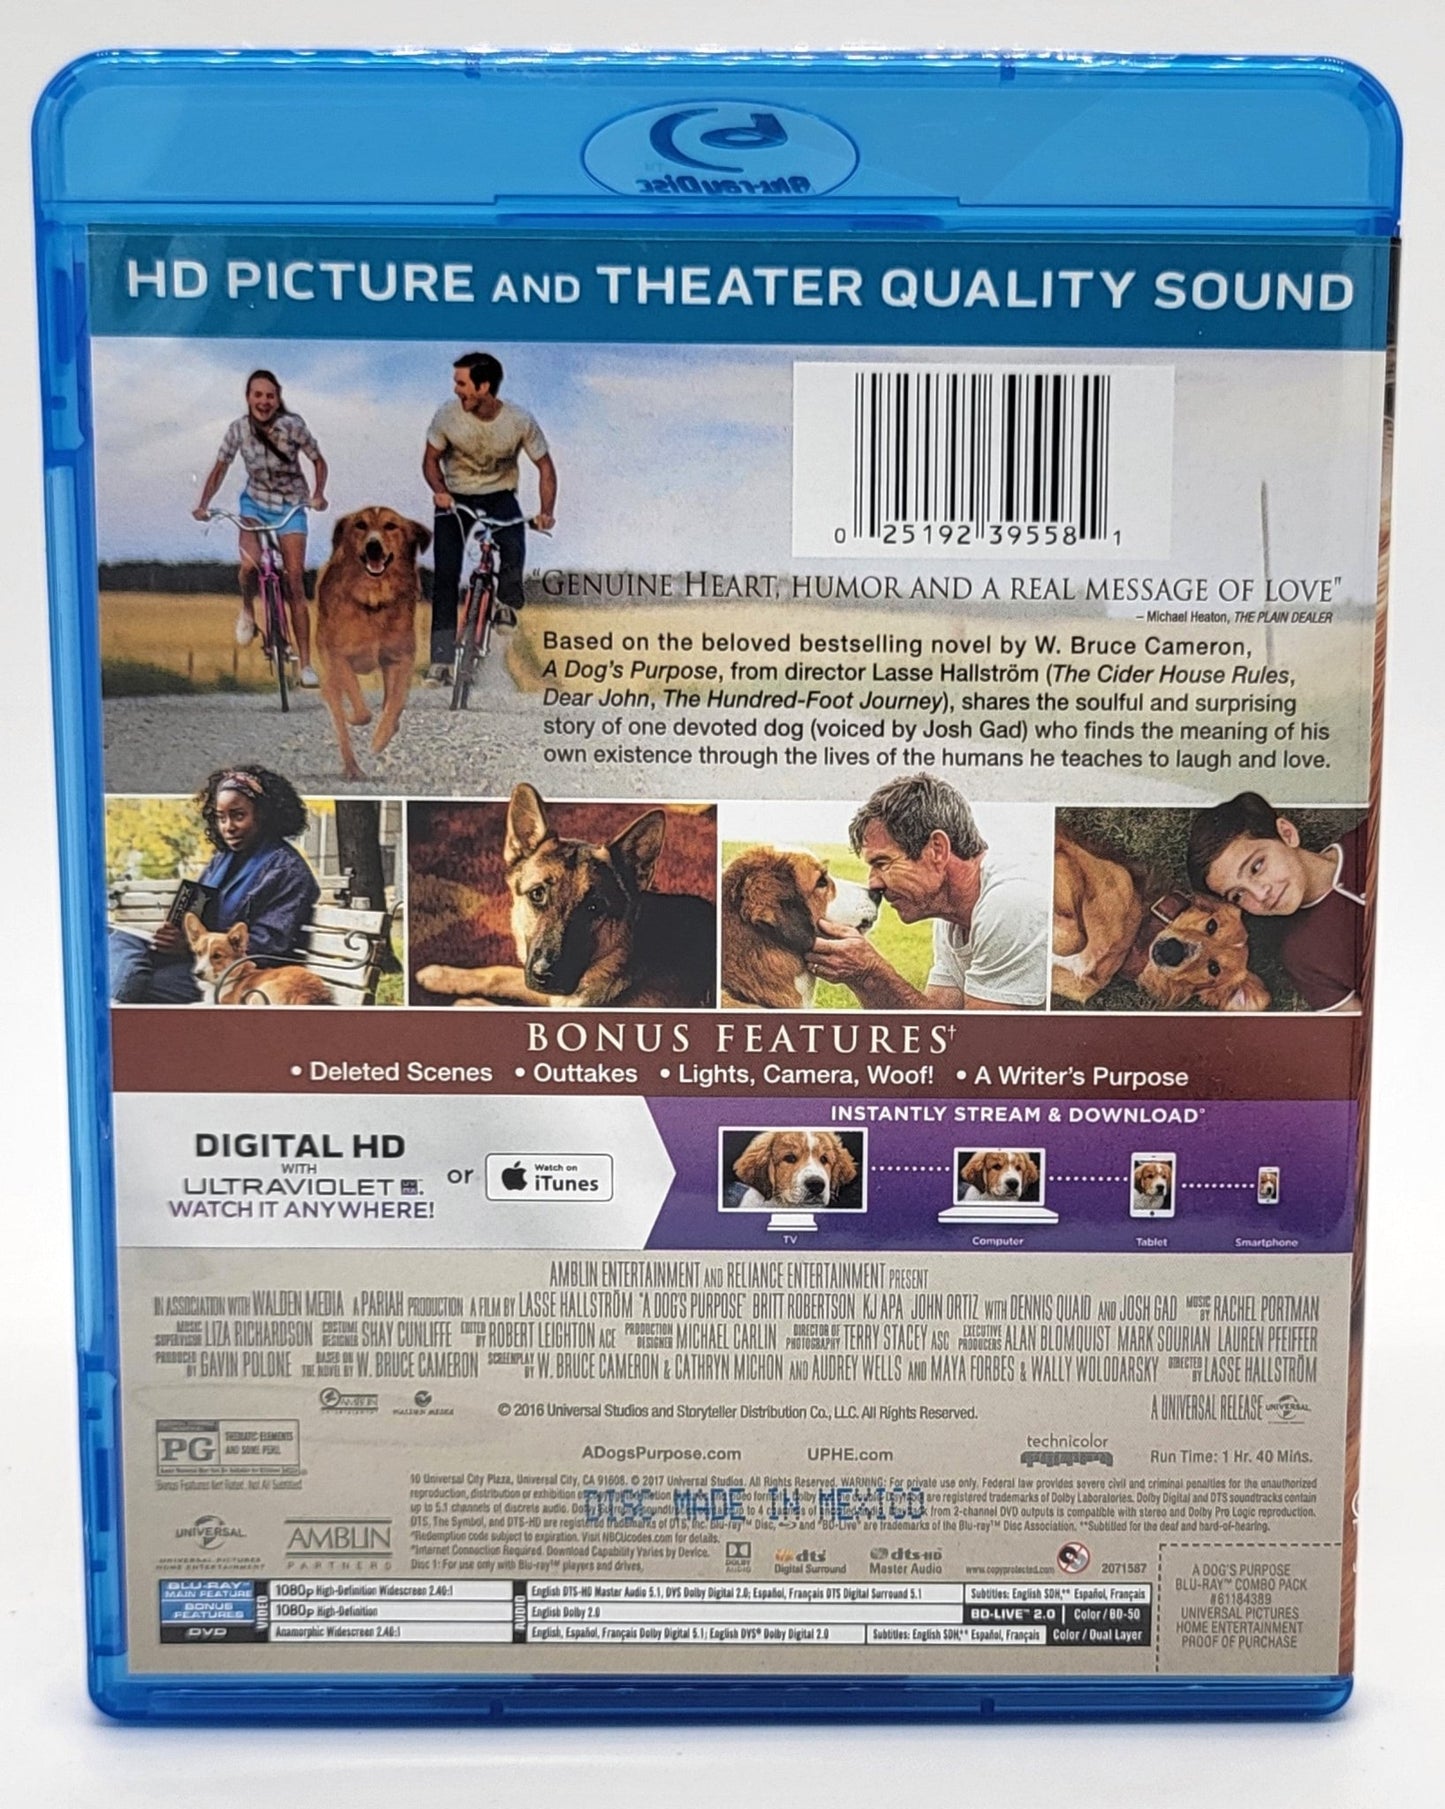 ‎ Universal Pictures Home Entertainment - A Dog's Purpose | Blu-ray & DVD | Widescreen - DVD & Blu-ray - Steady Bunny Shop